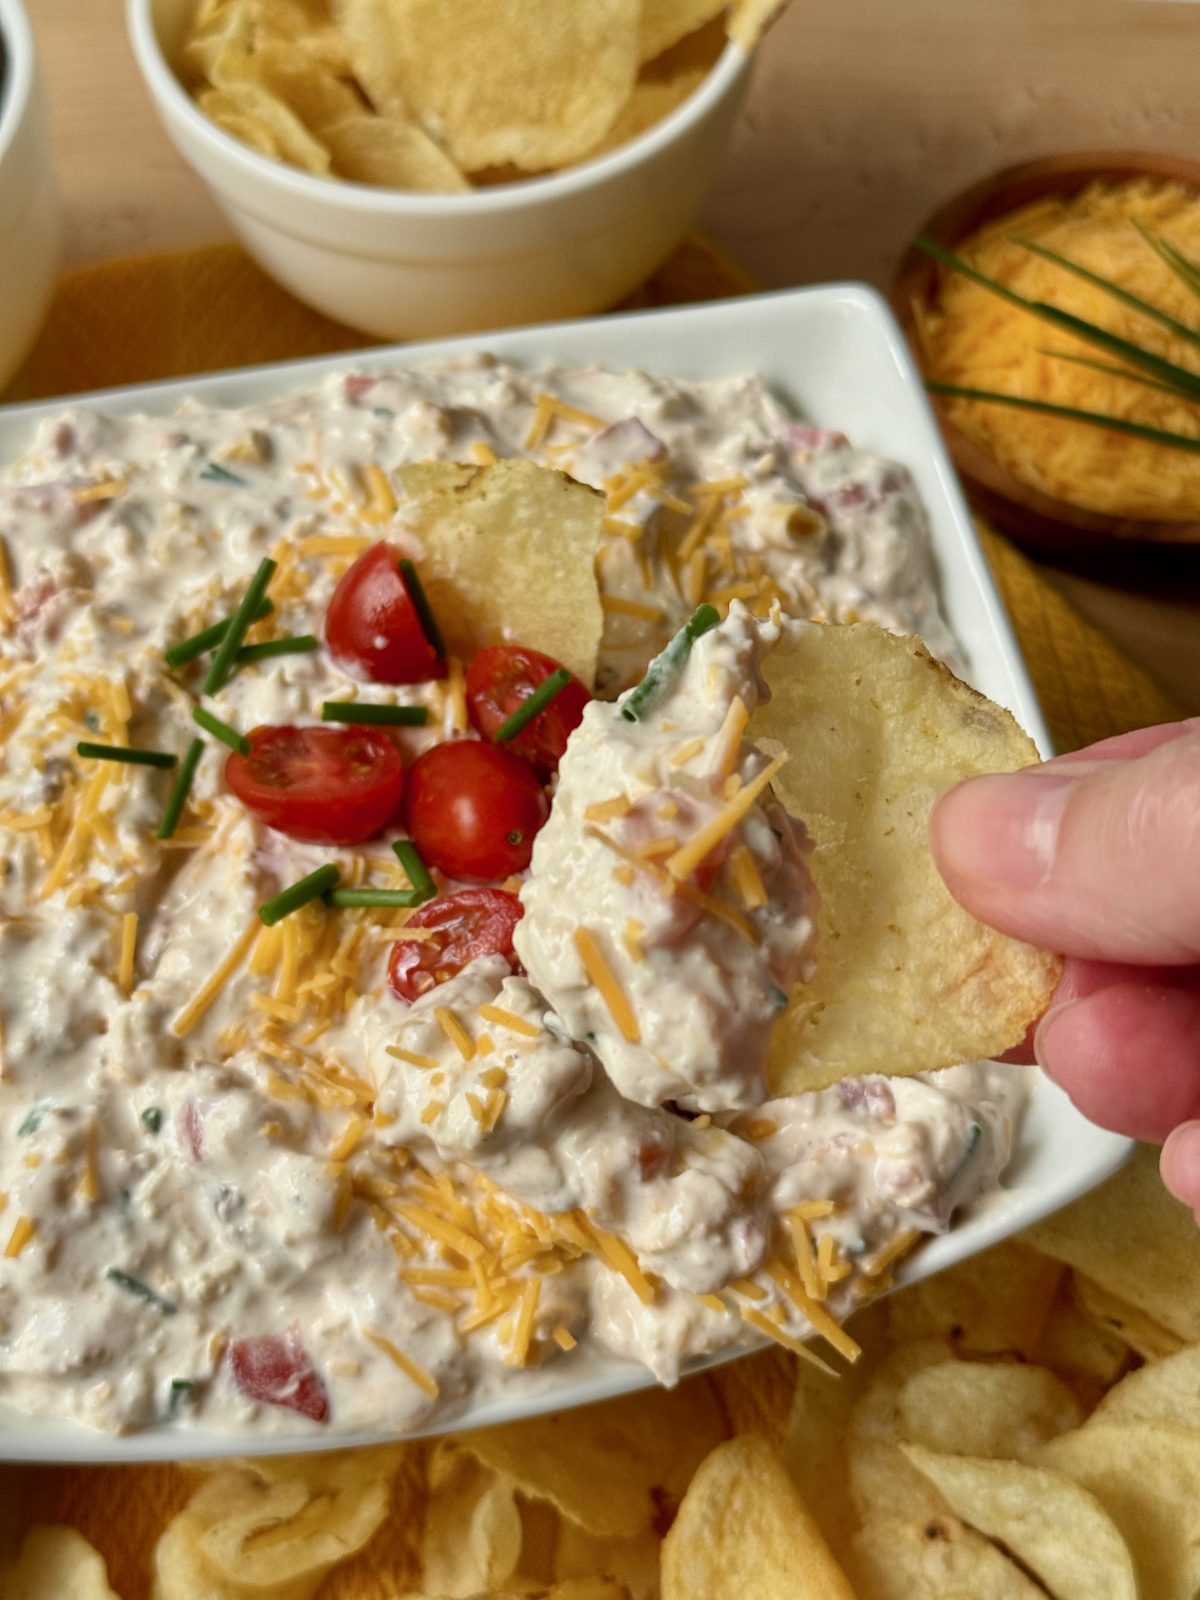 Vertical recipe photo of Sink the Boat Dip. Close up of white rectangular bowl filled with creamy colored dip topped with halved grape tomatoes and chives. A hand is holding a scoop of dip on a potato chip. In the background are some potato chips and a small wooden dish with shredded cheddar and chives.